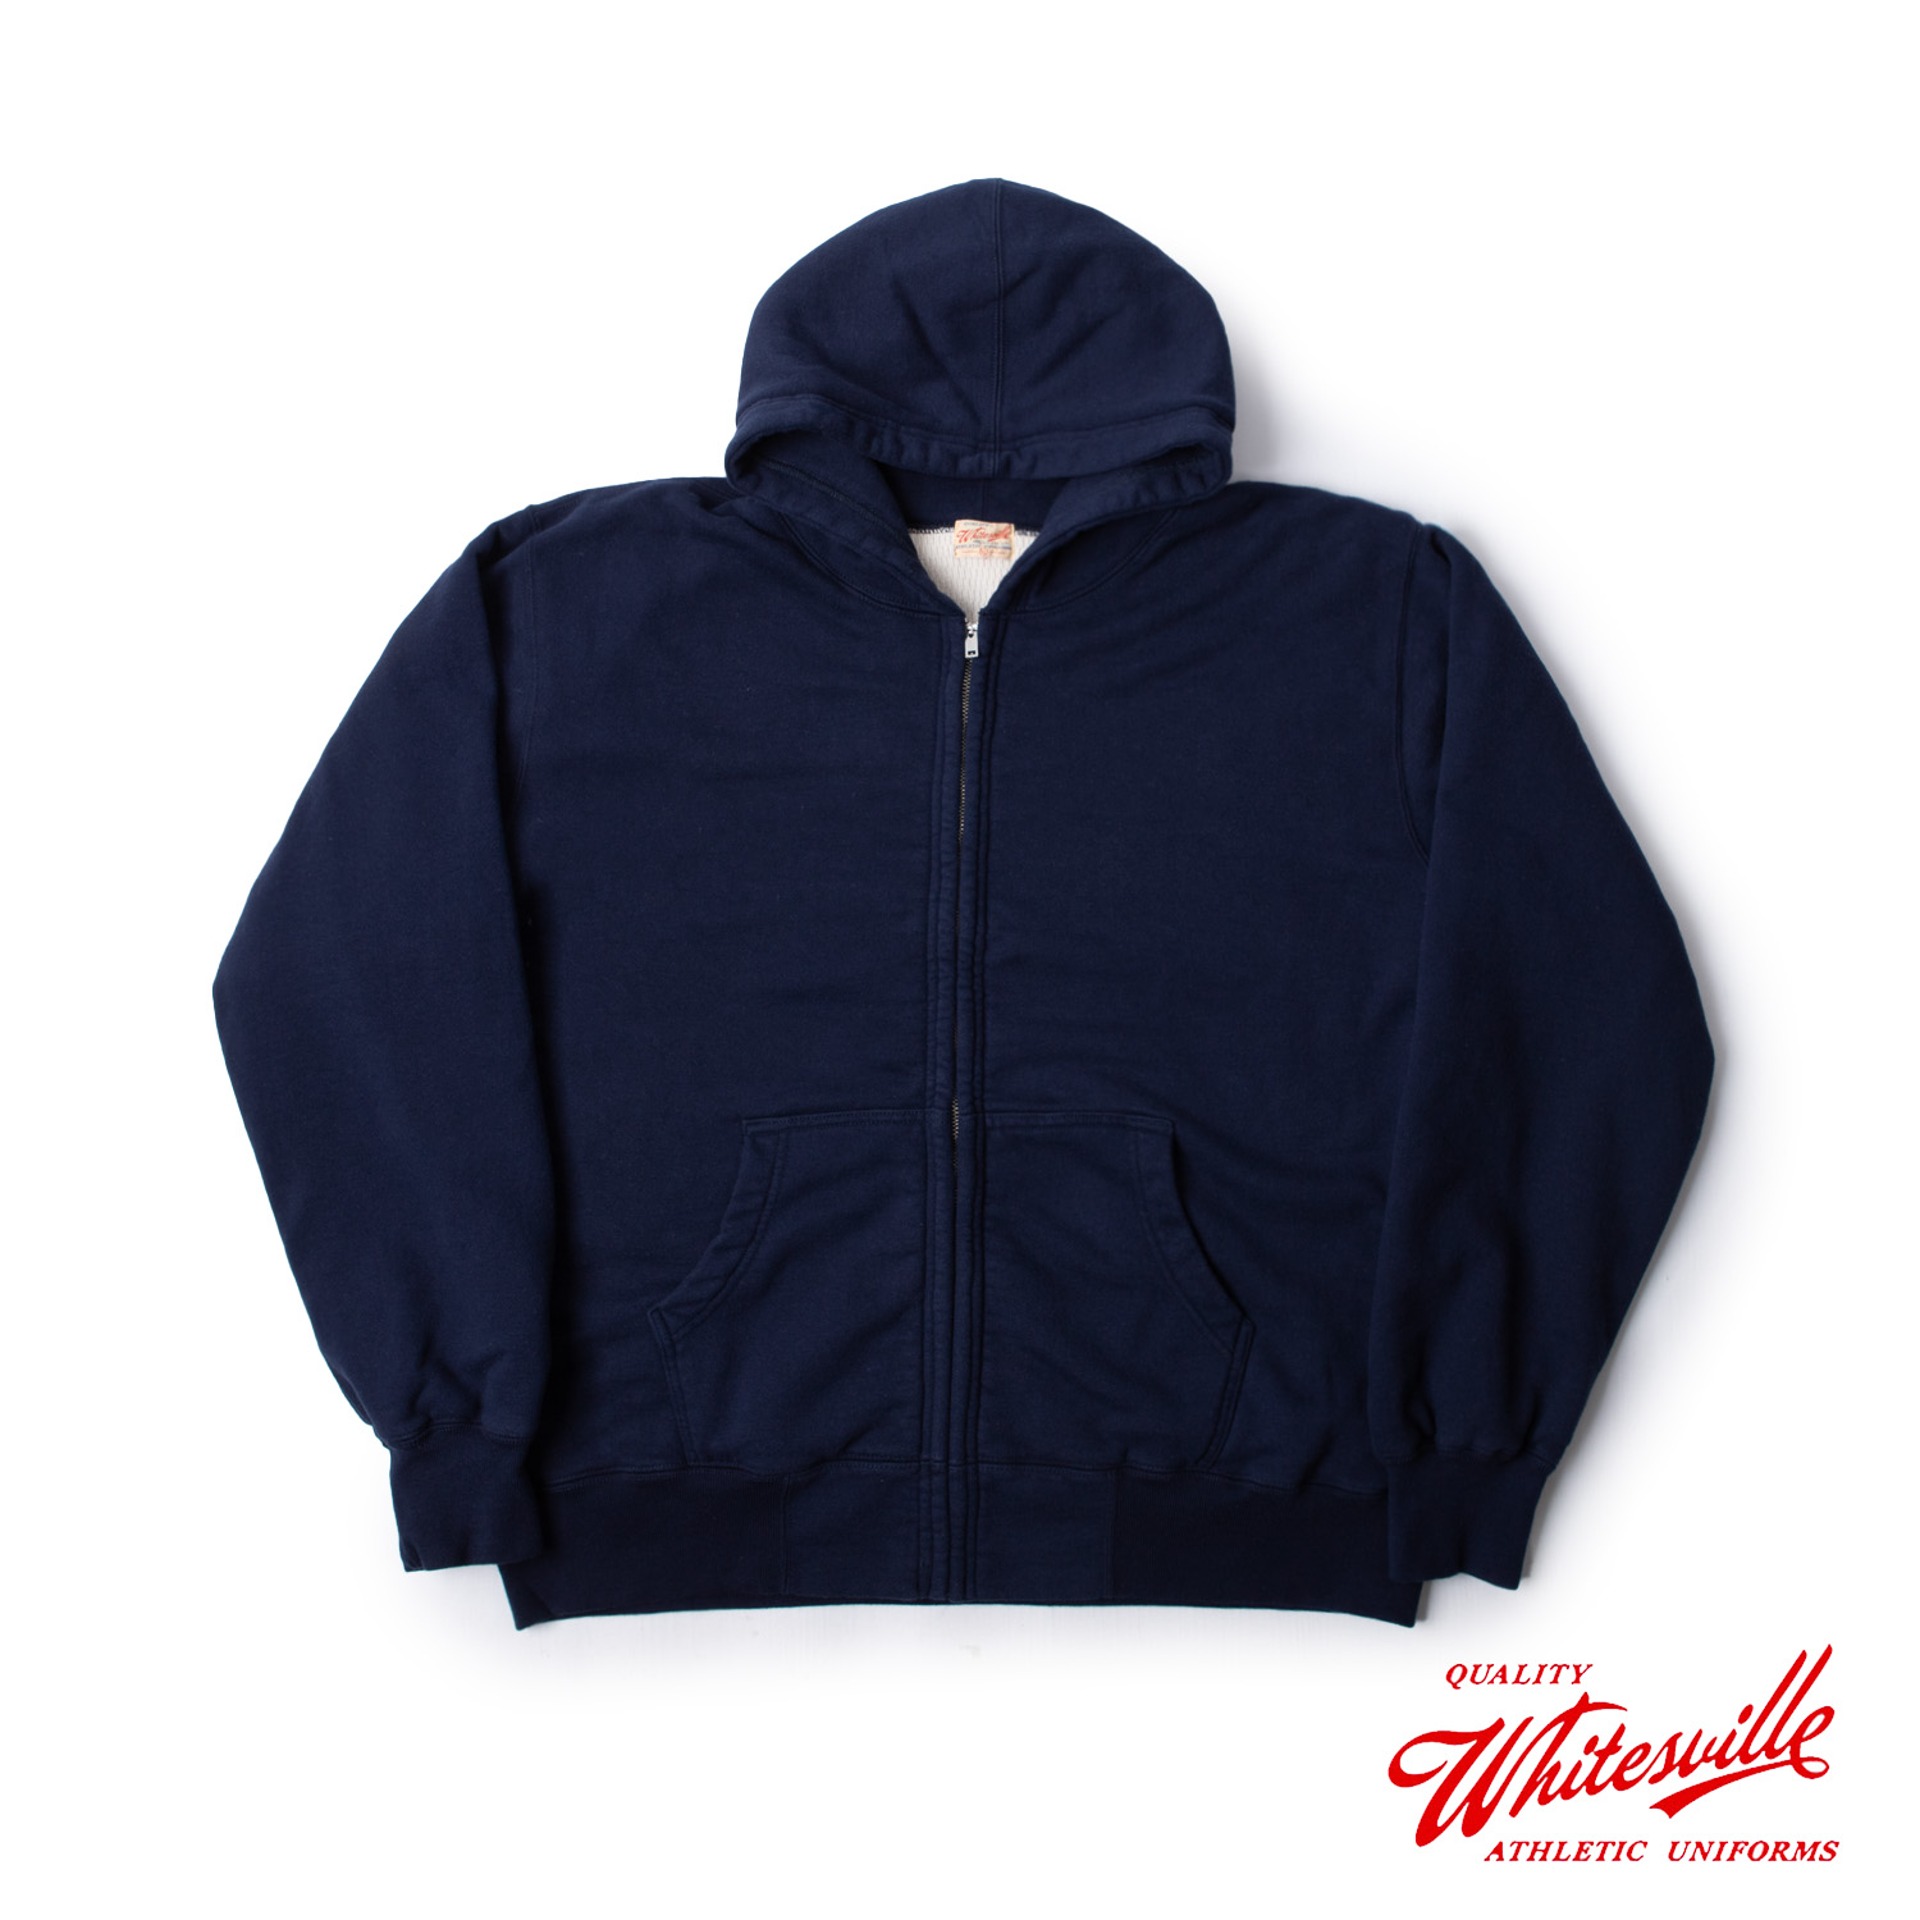 SET-IN ZIP SWEAT PARKA THERMAL LINING (Navy)